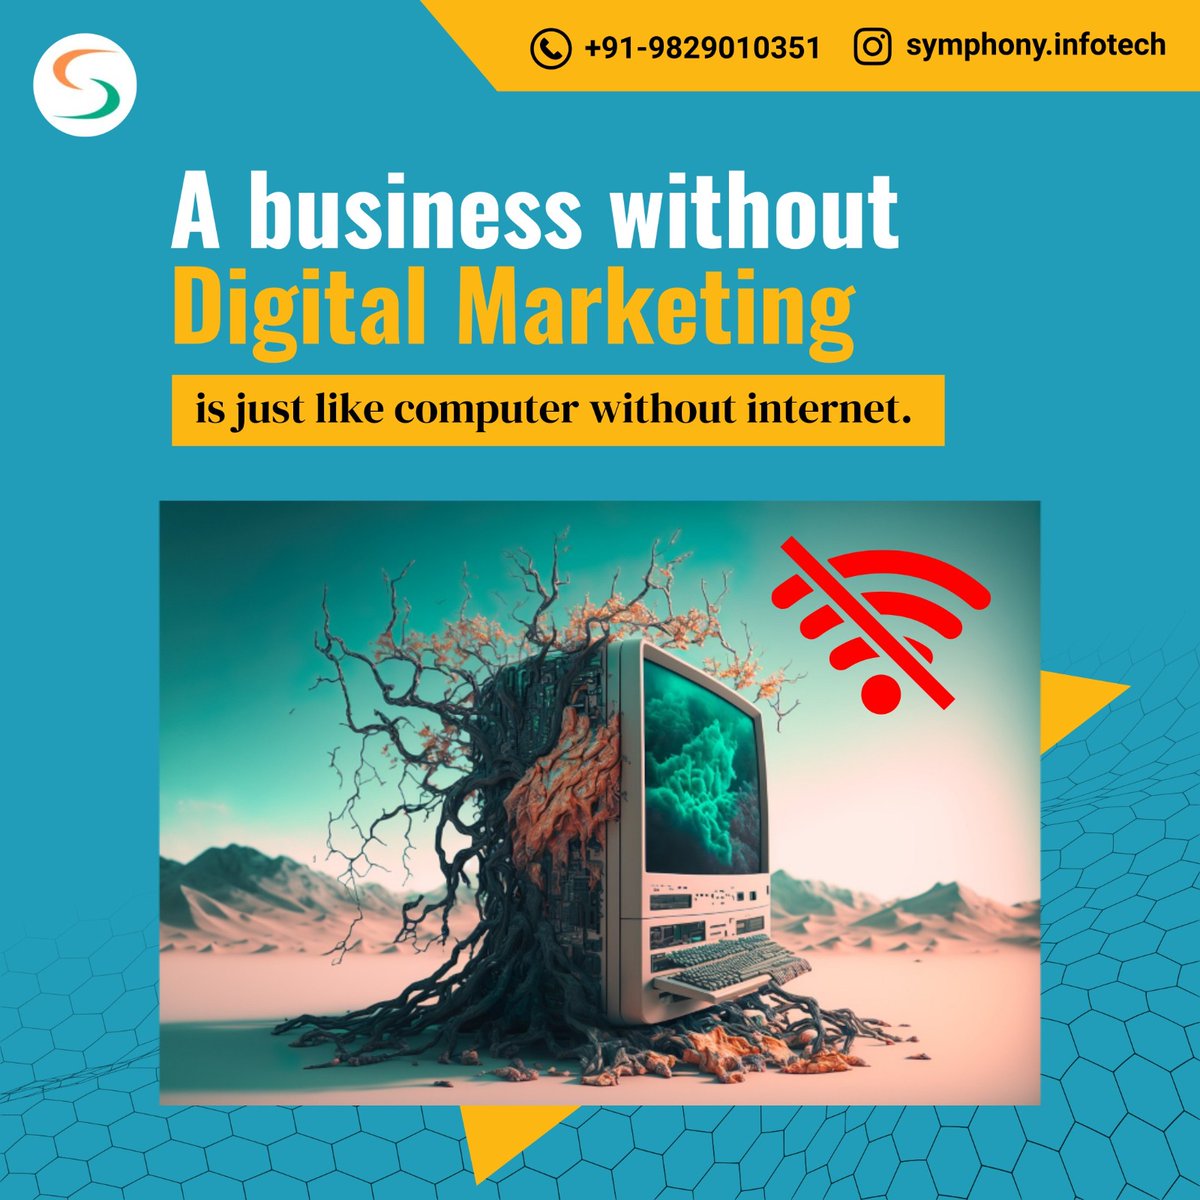 Embrace the digital era, expand your horizons, and connect with a world of possibilities through strategic online efforts.

For more such tips follow
Symphony Infotech

Reach out to discuss your growth plan.

👉 Call or whatsapp :- +91- 98290 10351

#DigitalMarketingEssentials